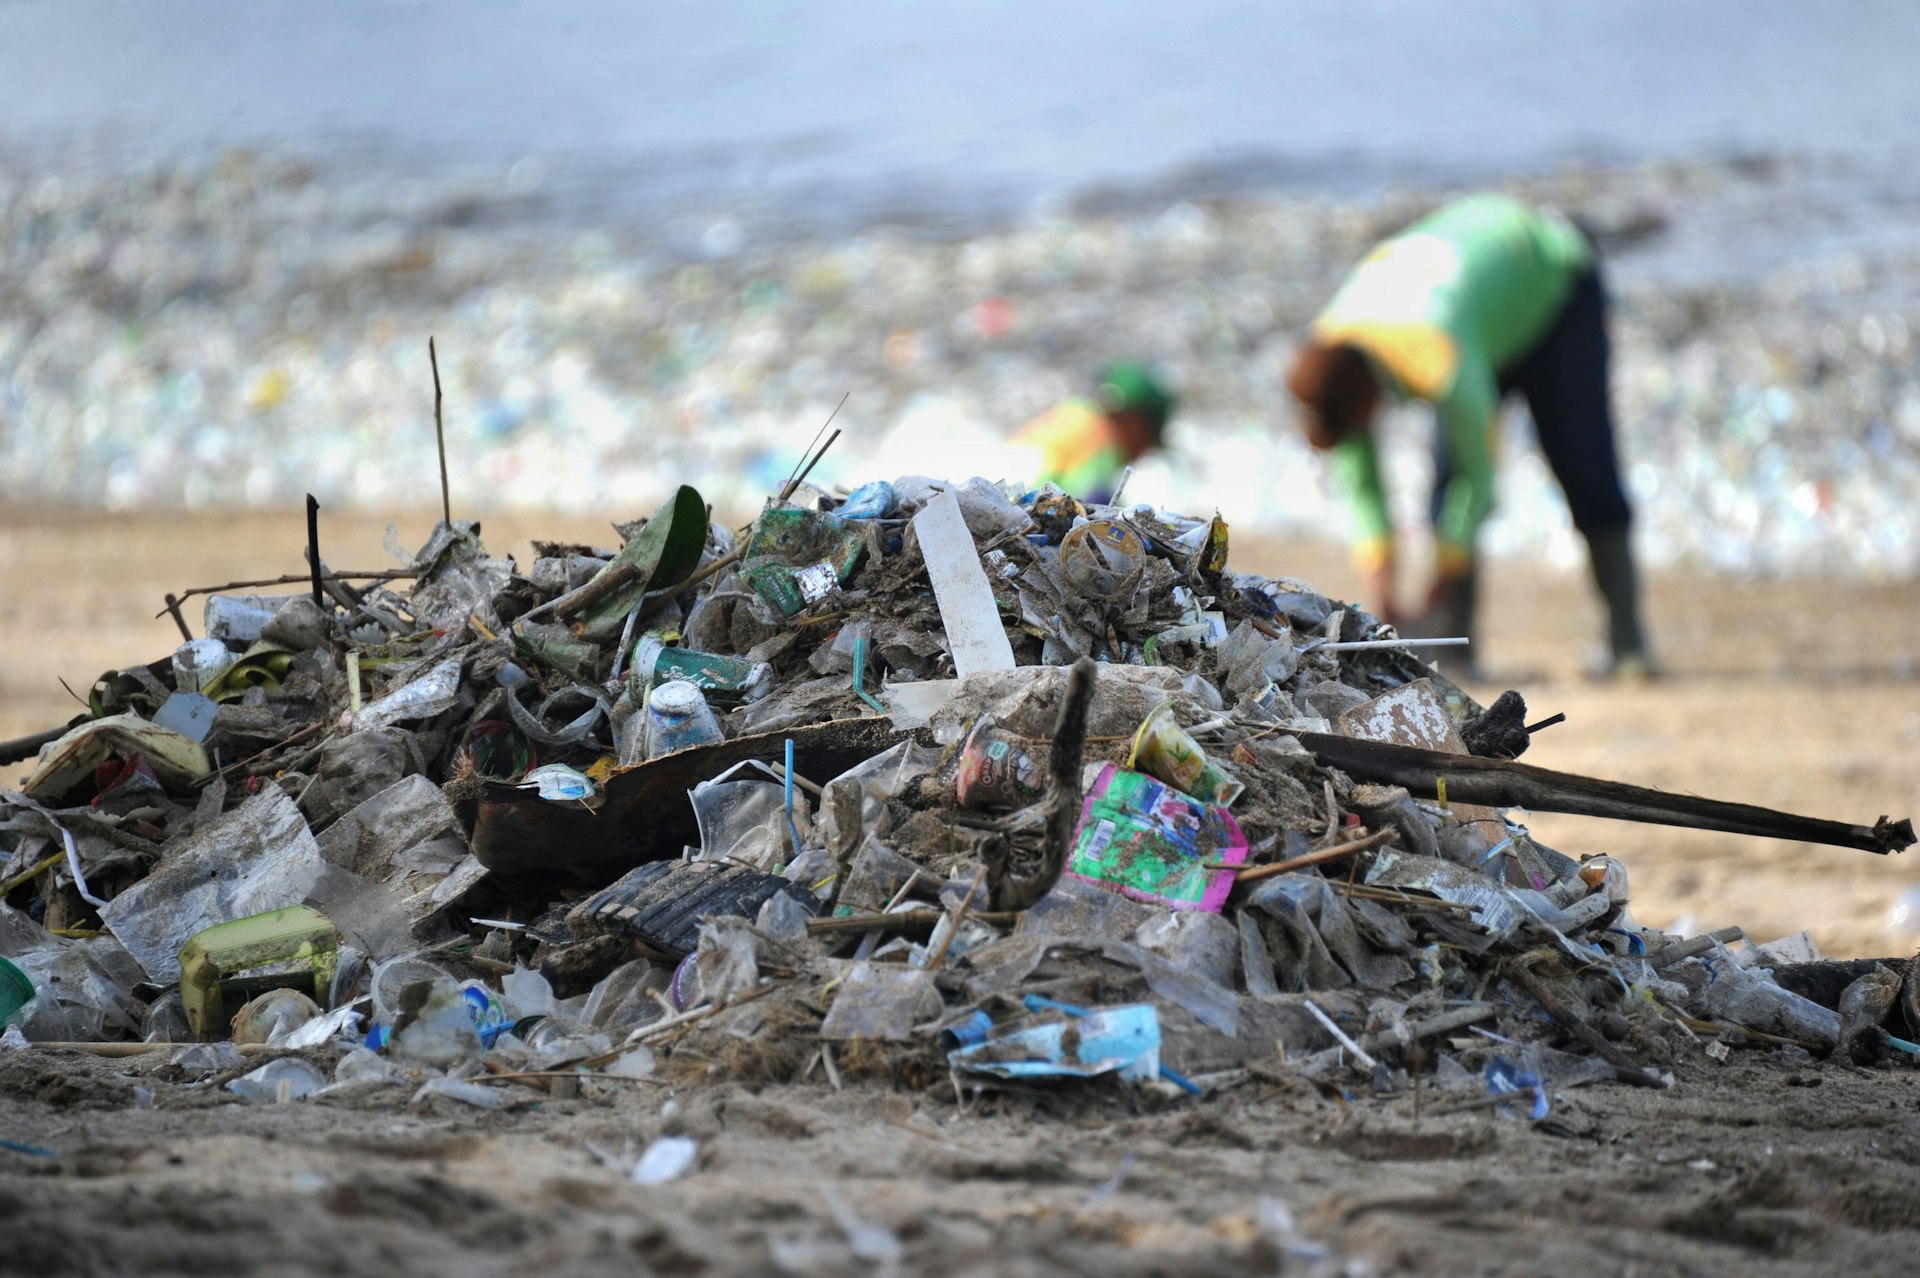 A mound of garbage on Kuta Beach in Bali. In the distance, and slightly out of focus, two people work to clear the litter from the sand.